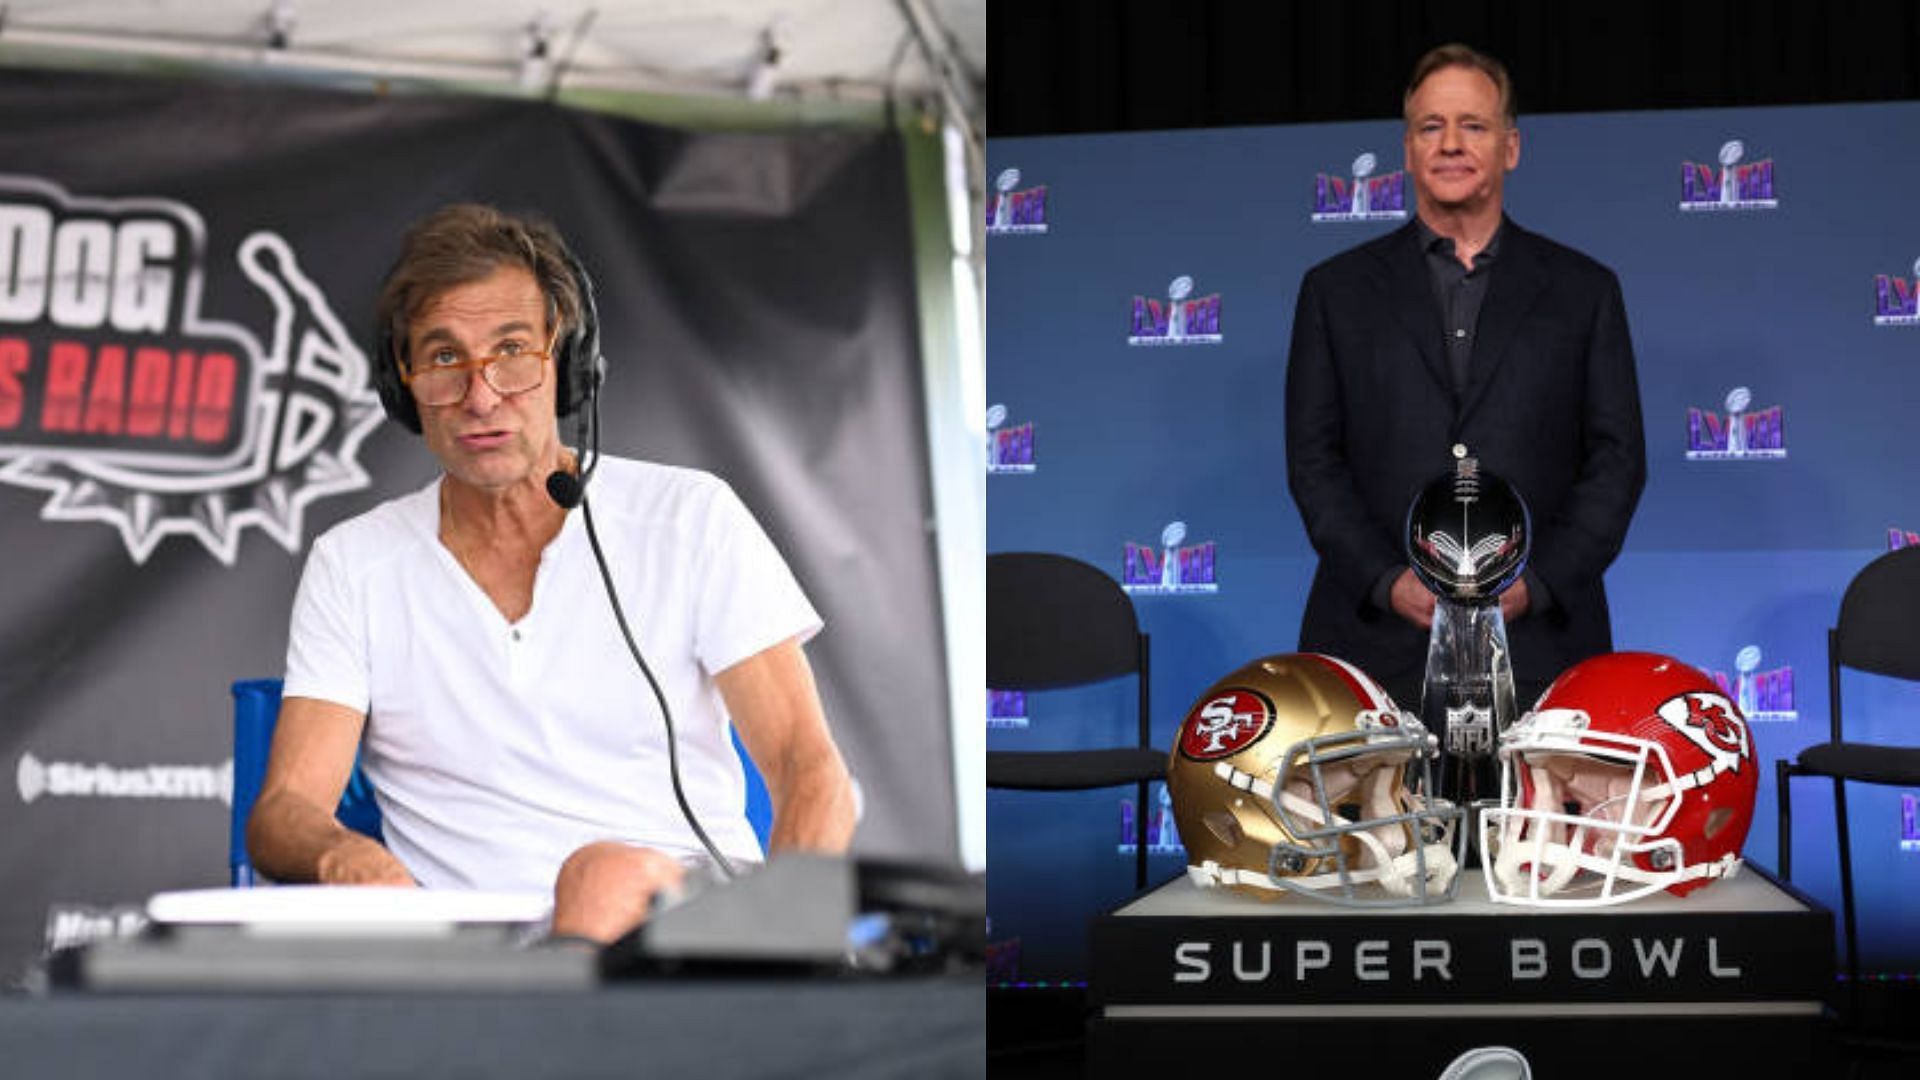 Chris &quot;Mad Dog&quot; Russo is not pleased with Roger Goodell